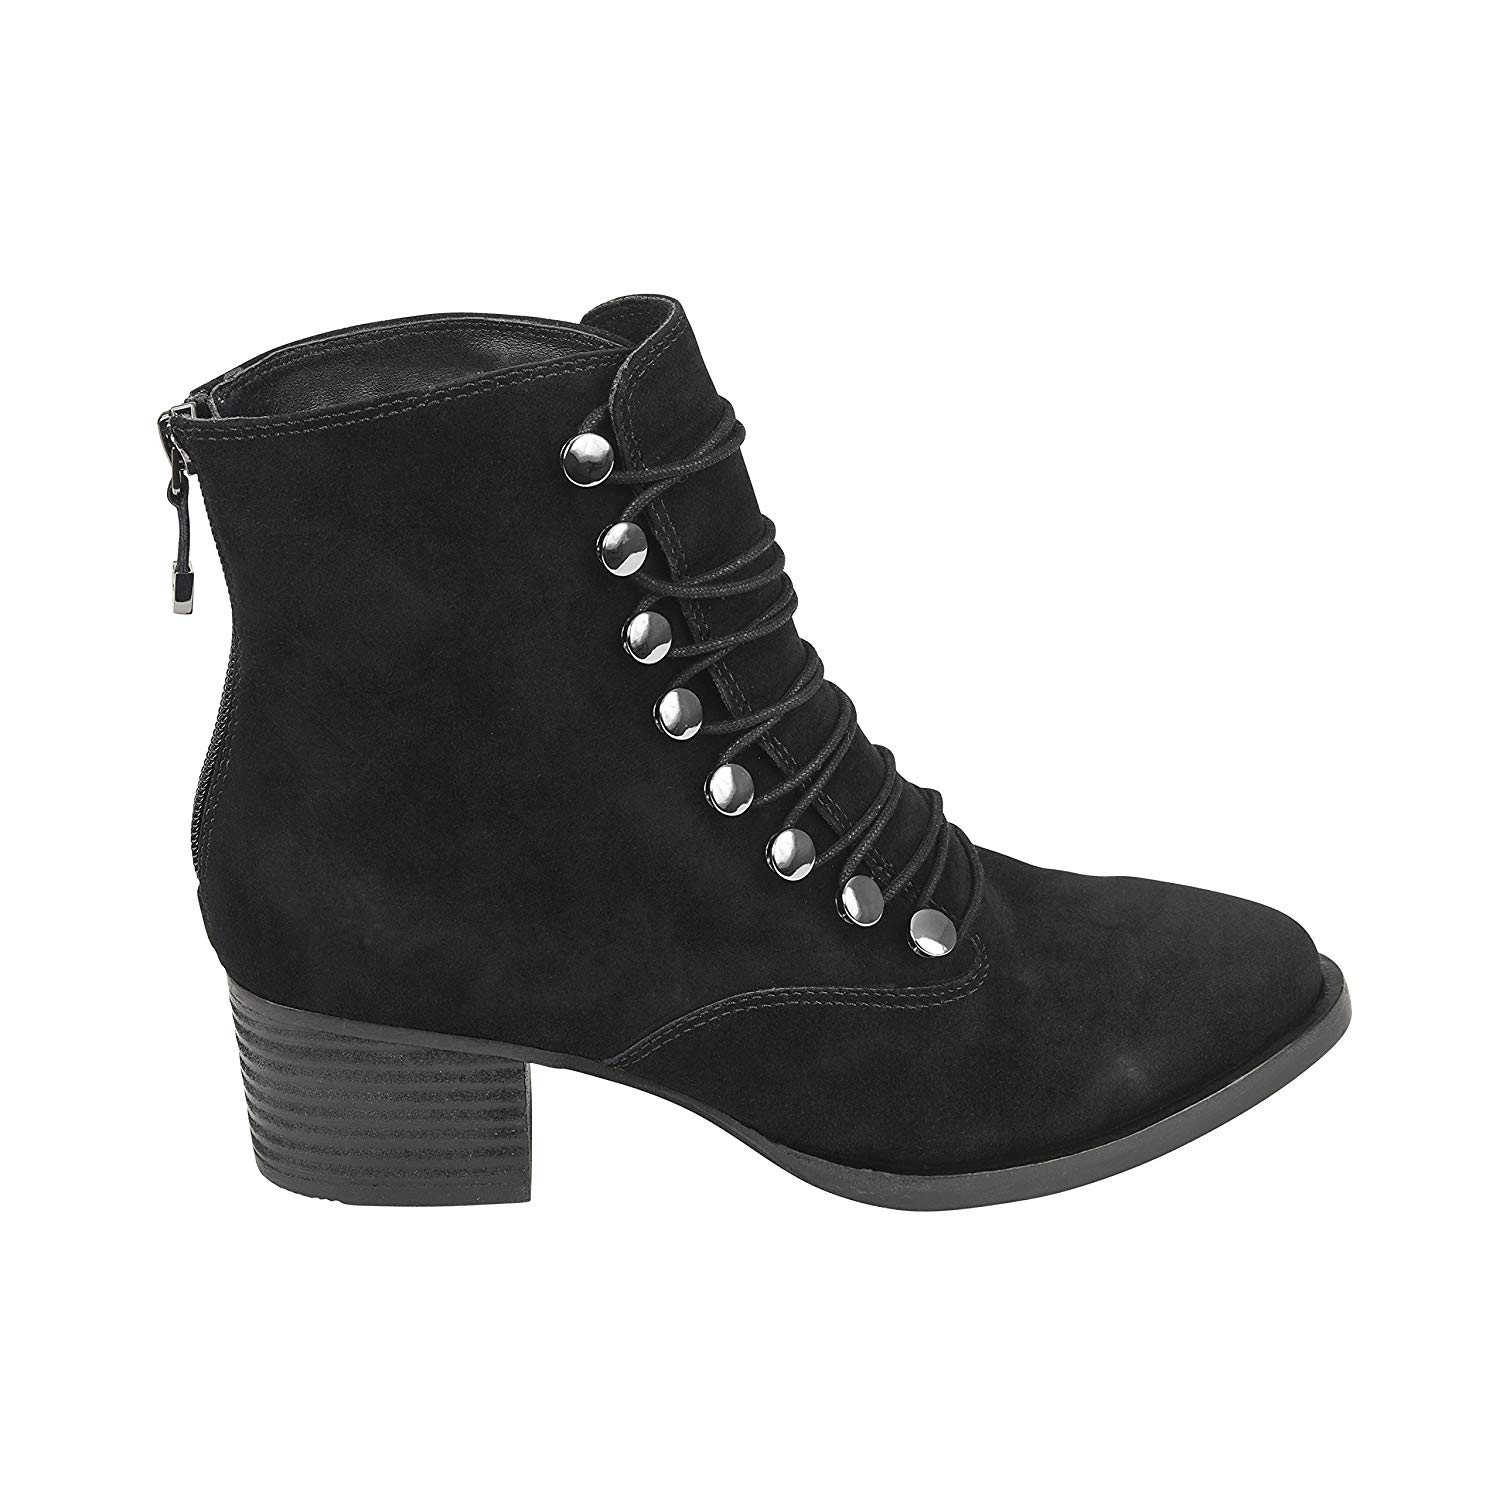 Earth Shoes Womens Doral Closed Toe Ankle Fashion Boots, Black Suede ...